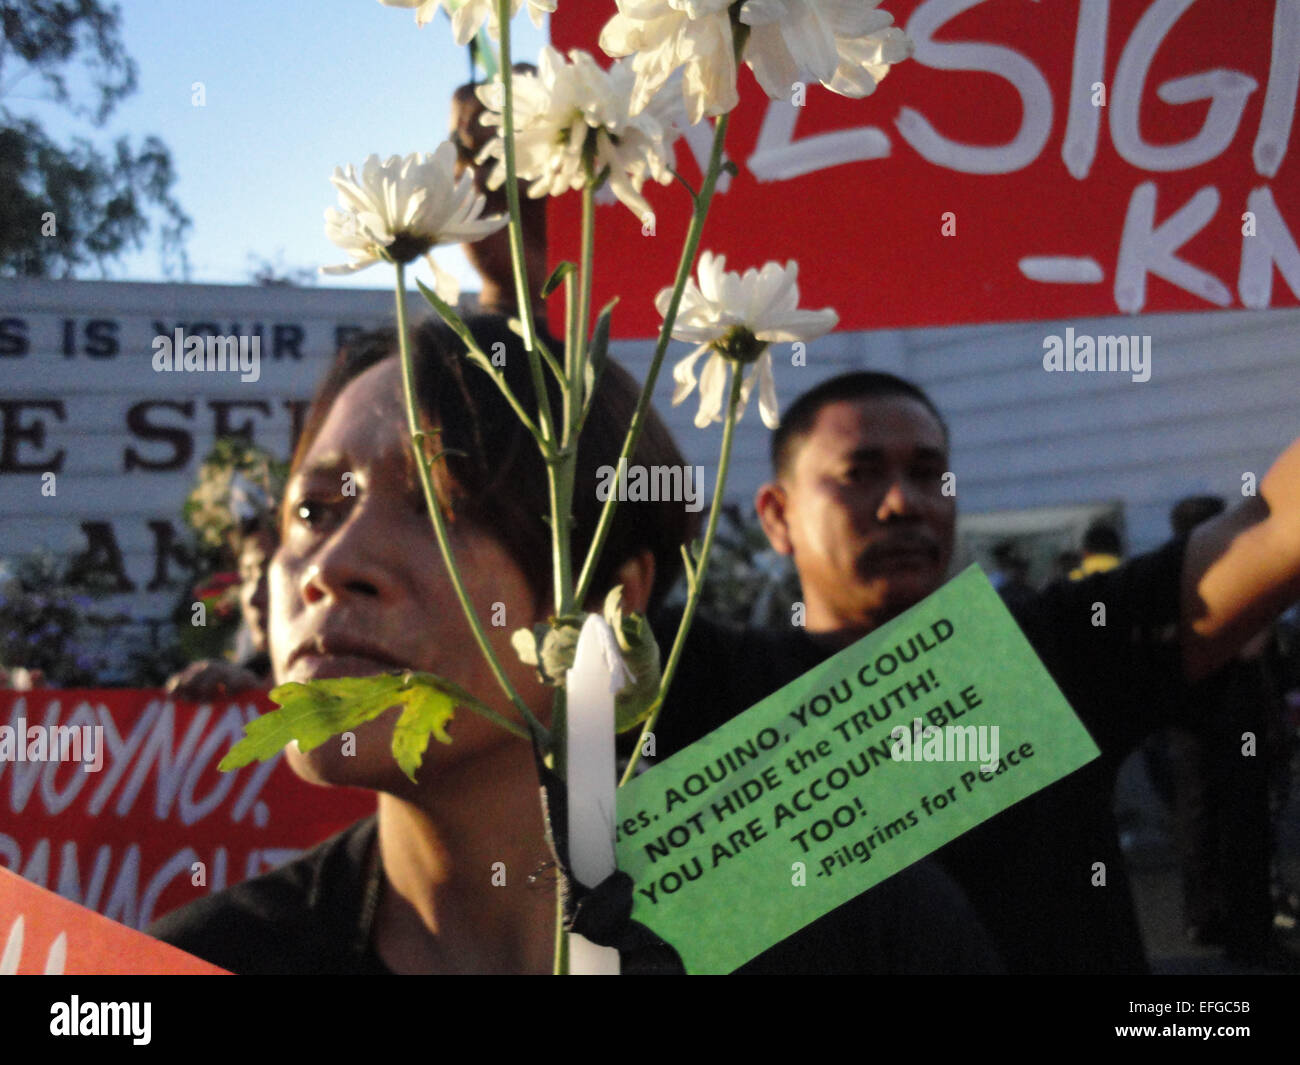 Quezon City, Philippines. 3rd Feb, 2015. Activists hold up placards, candles, and flowers outside the Philippine National Police headquarters. A mass was celebrated outside the Philippine National Police headquarters as they called for truth and accountability for the casualties of the botched anti-terror operation in Mamasapano, Maguindanao provionce last January 25, including 44 police commandos, as well as several civilians. Credit:  Richard James Mendoza/Pacific Press/Alamy Live News Stock Photo